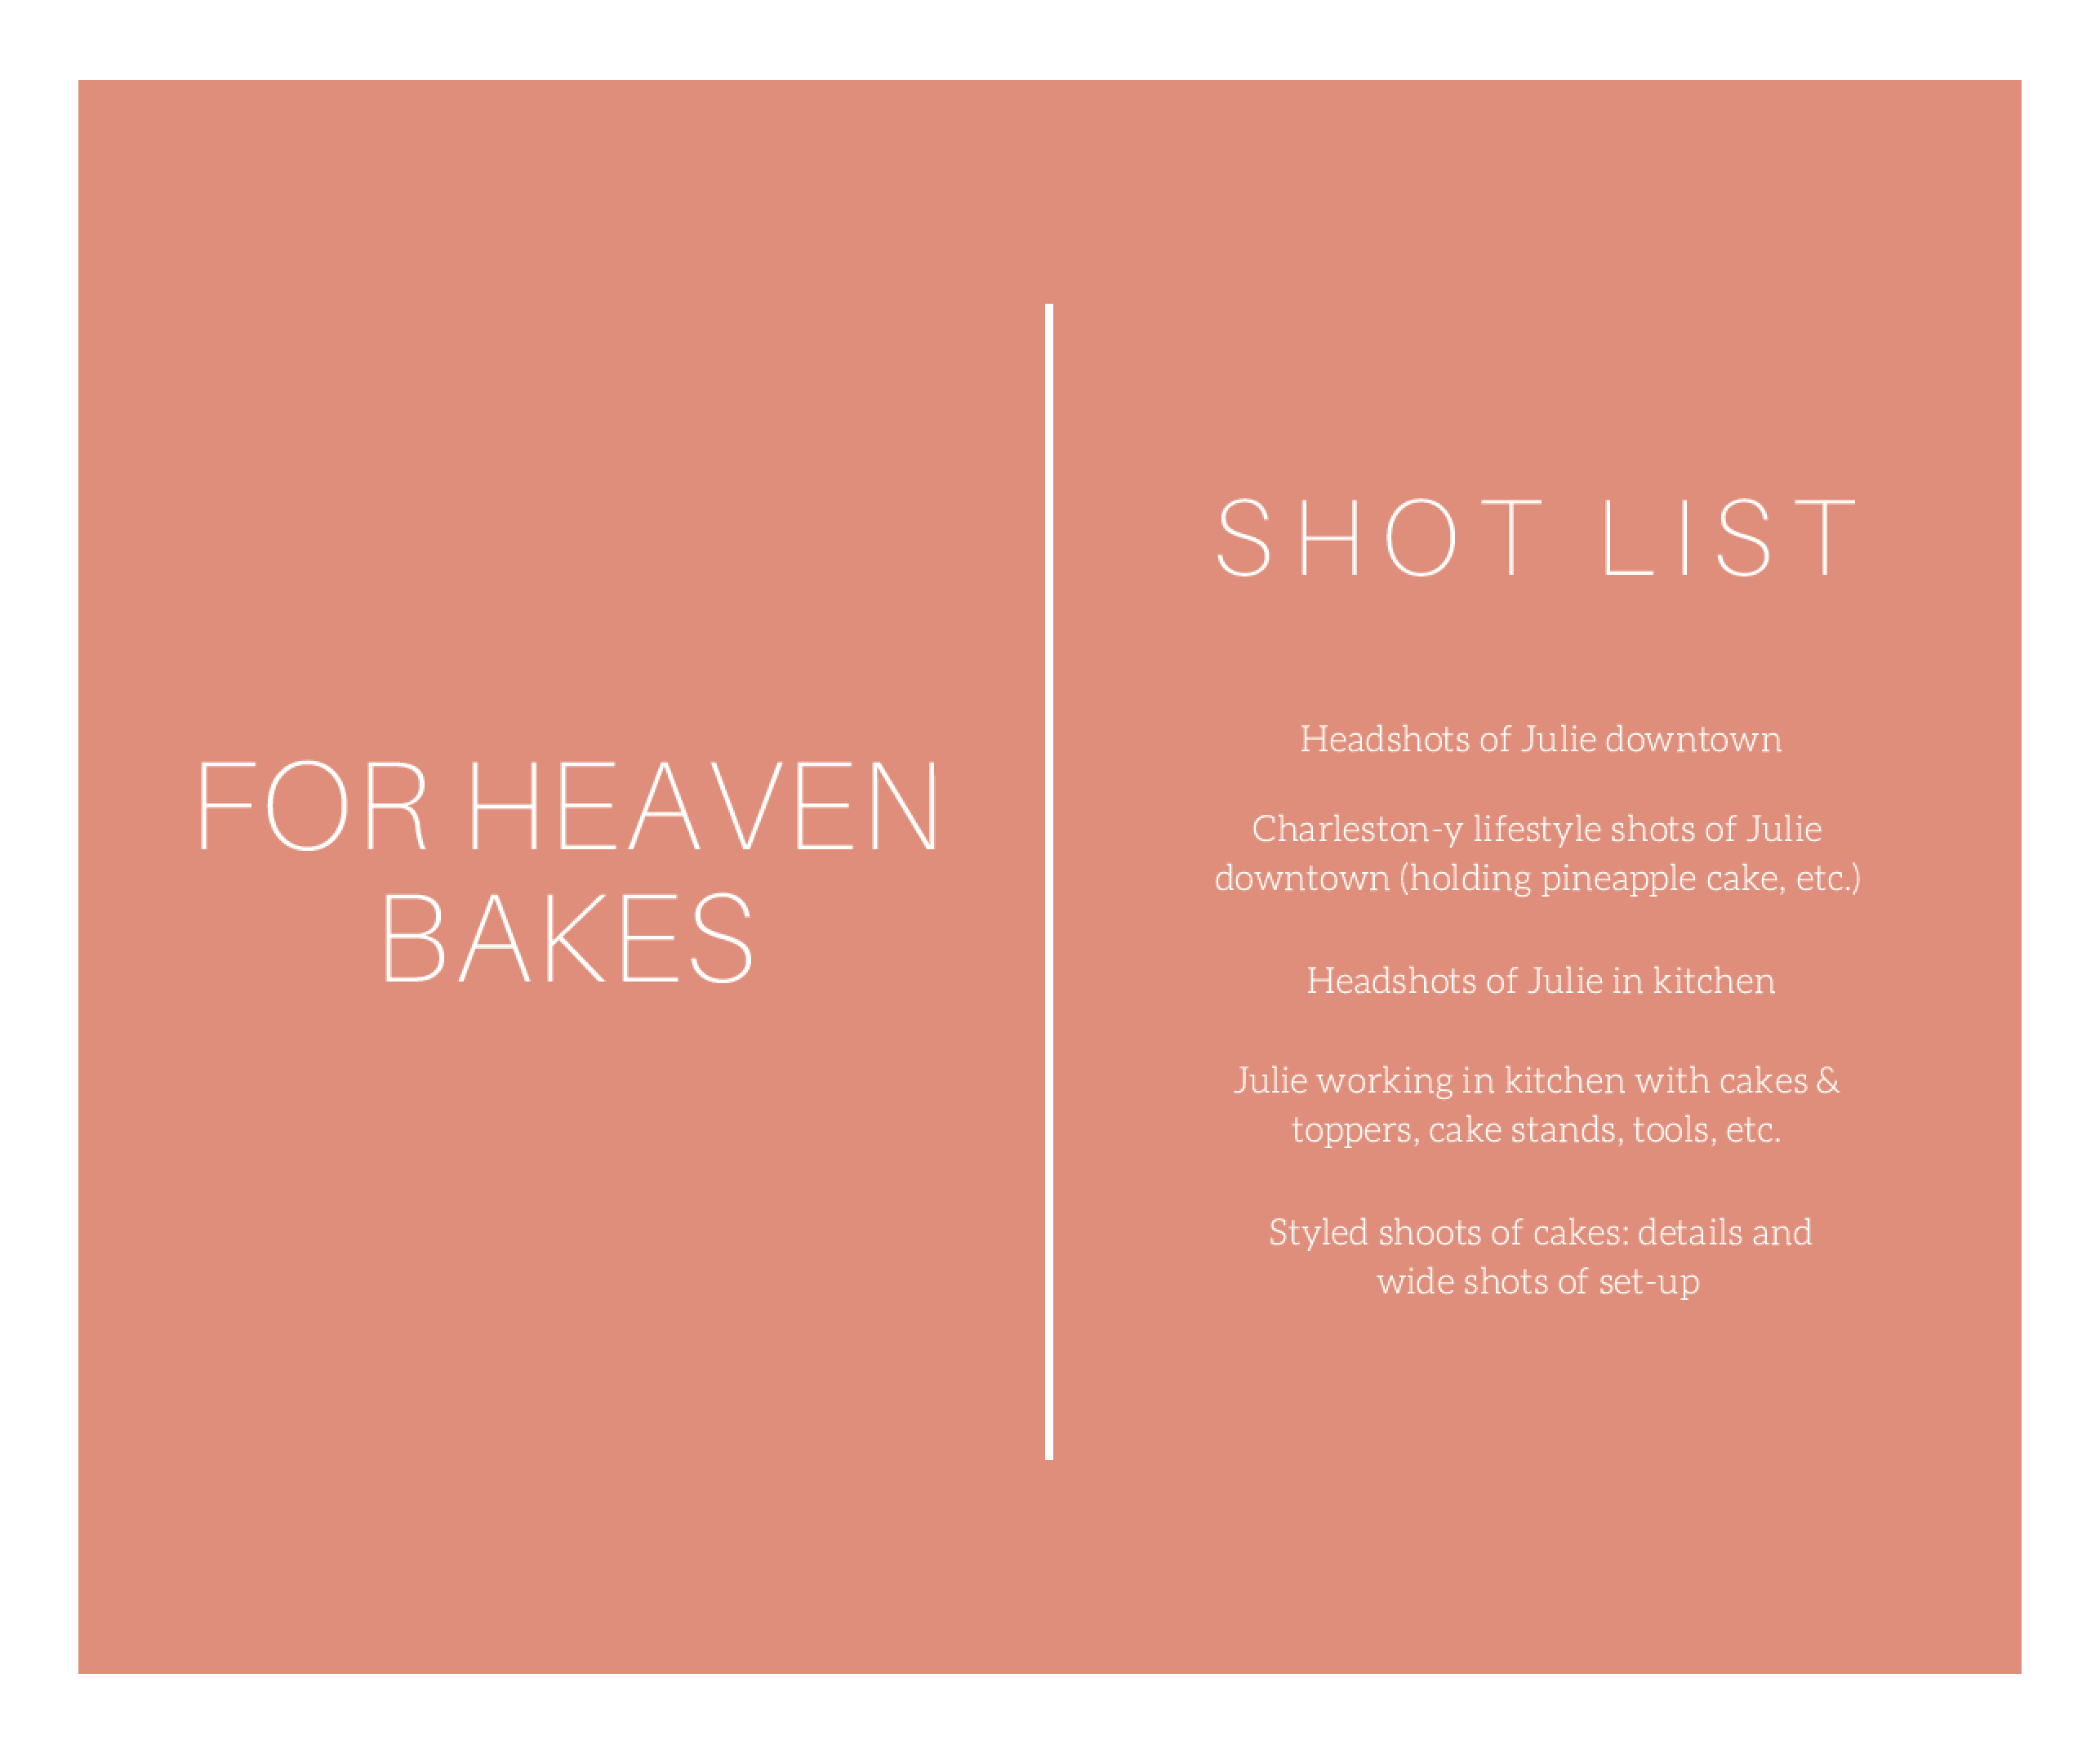 Shot list made in Canva for a personal branding photoshoot